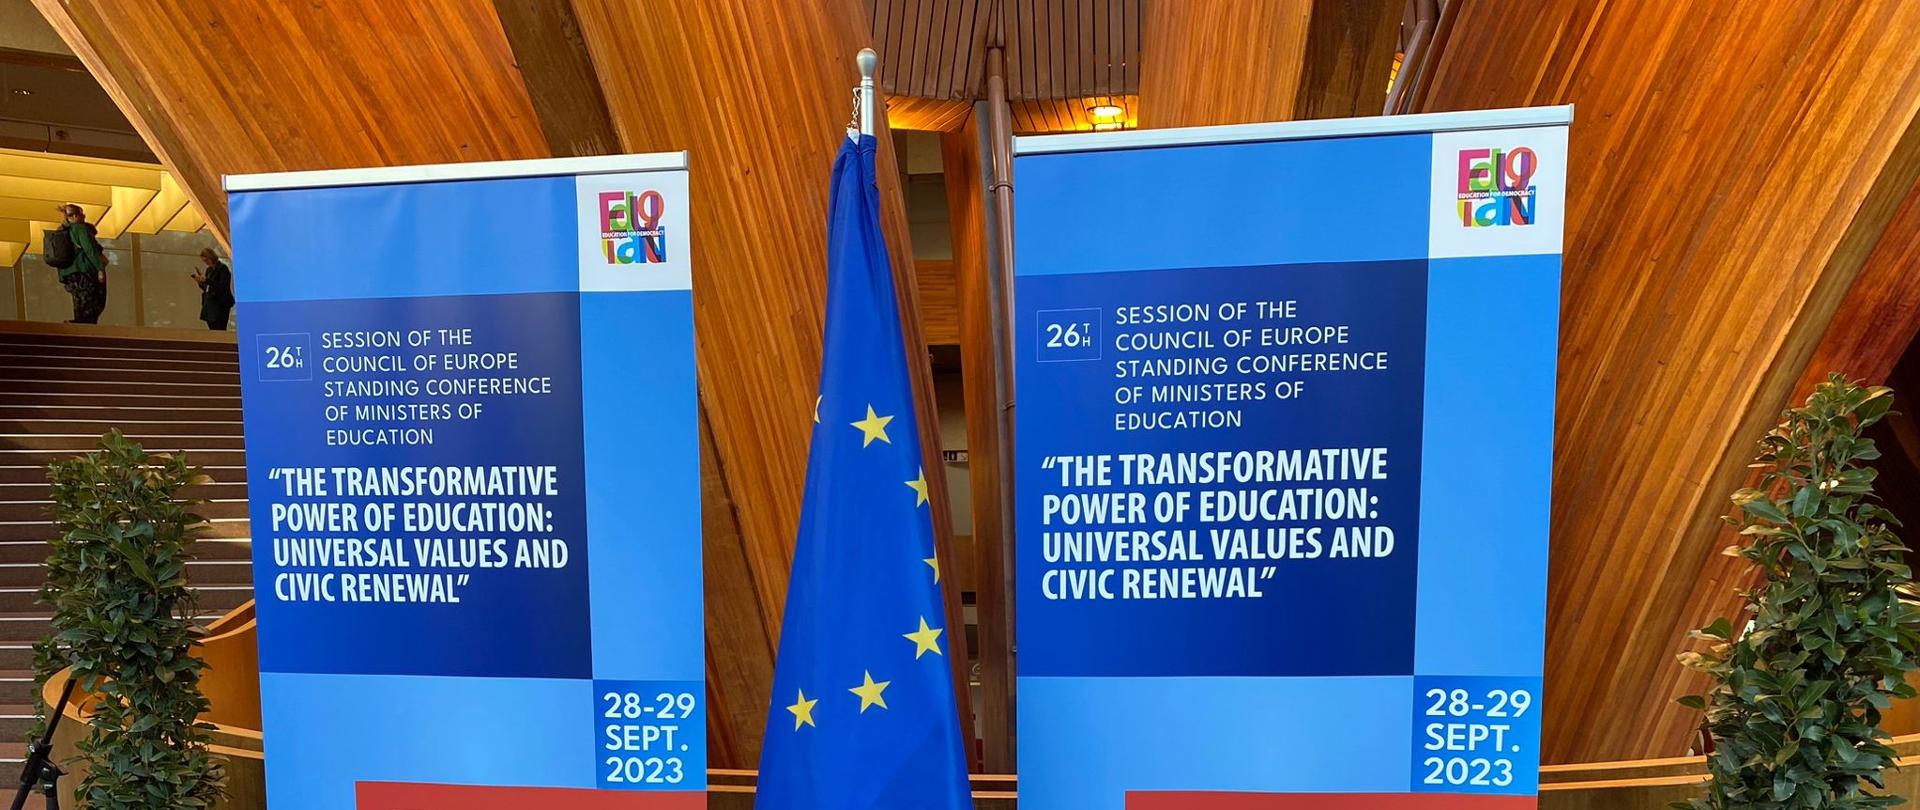 Council of Europe Standing Conference of Ministers of Education.